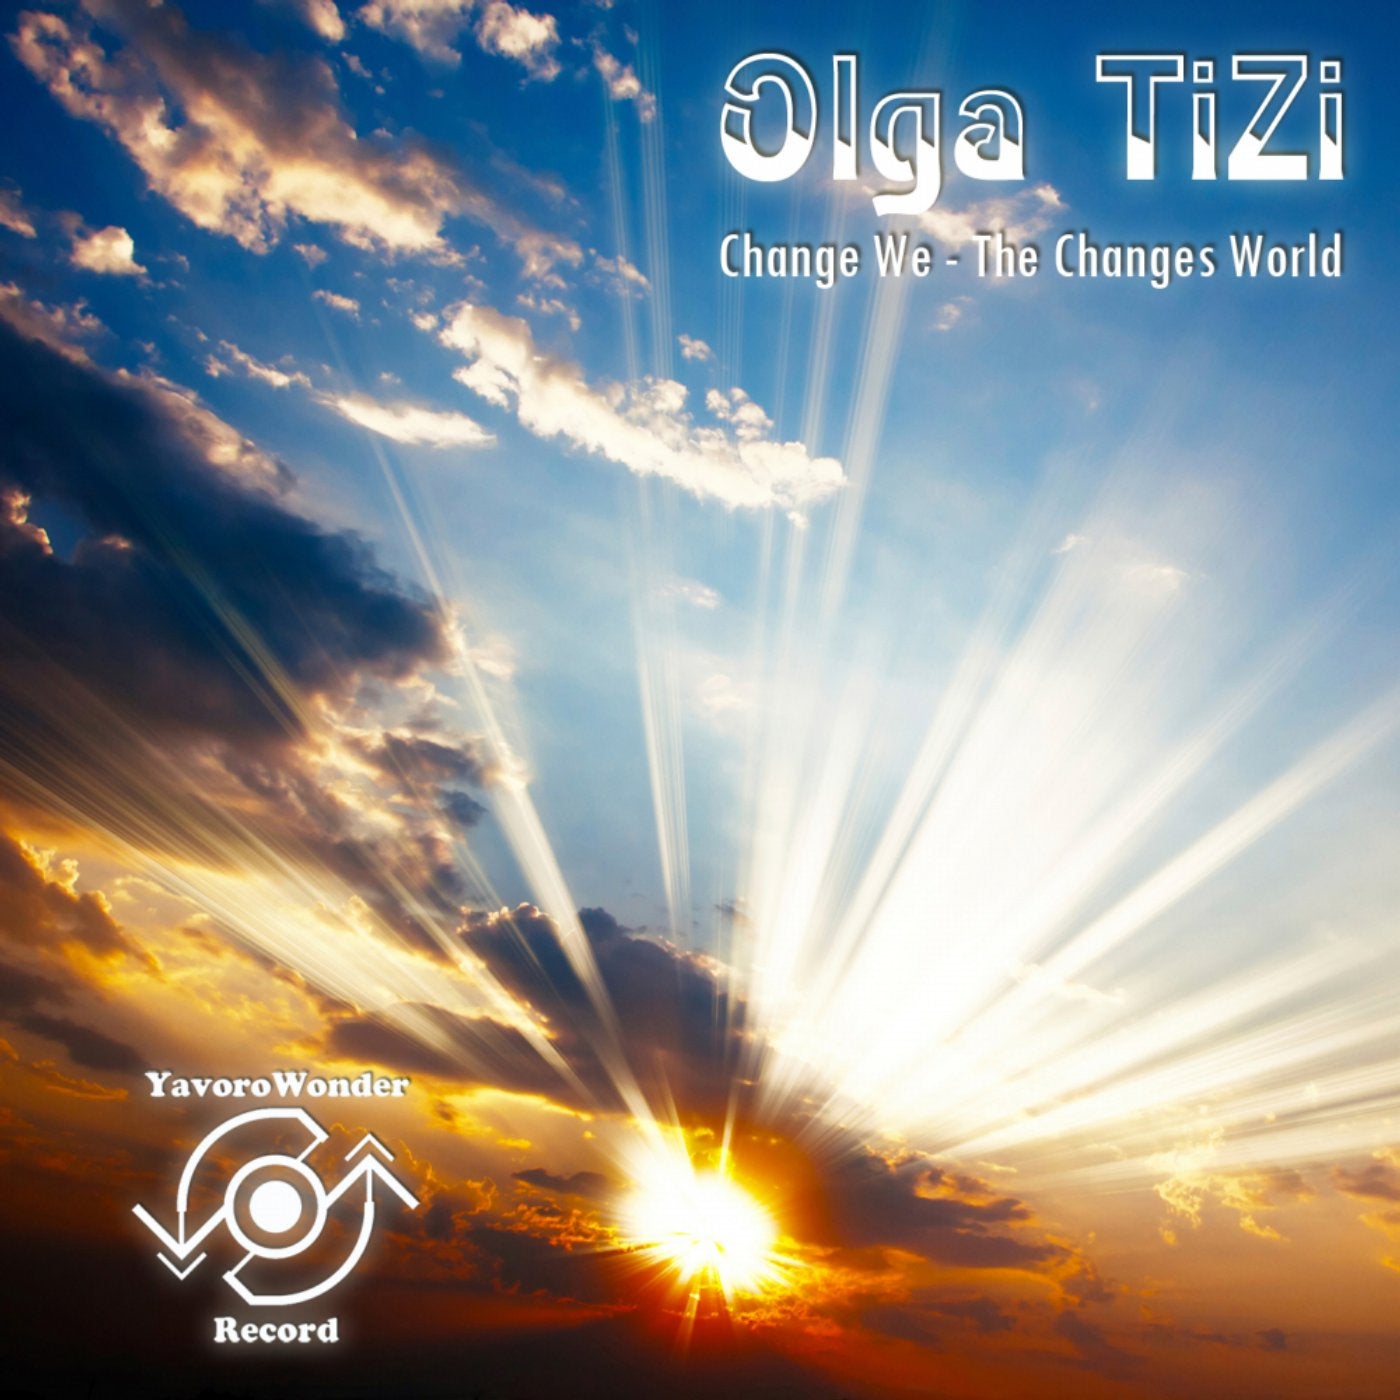 Change We - The Changes World